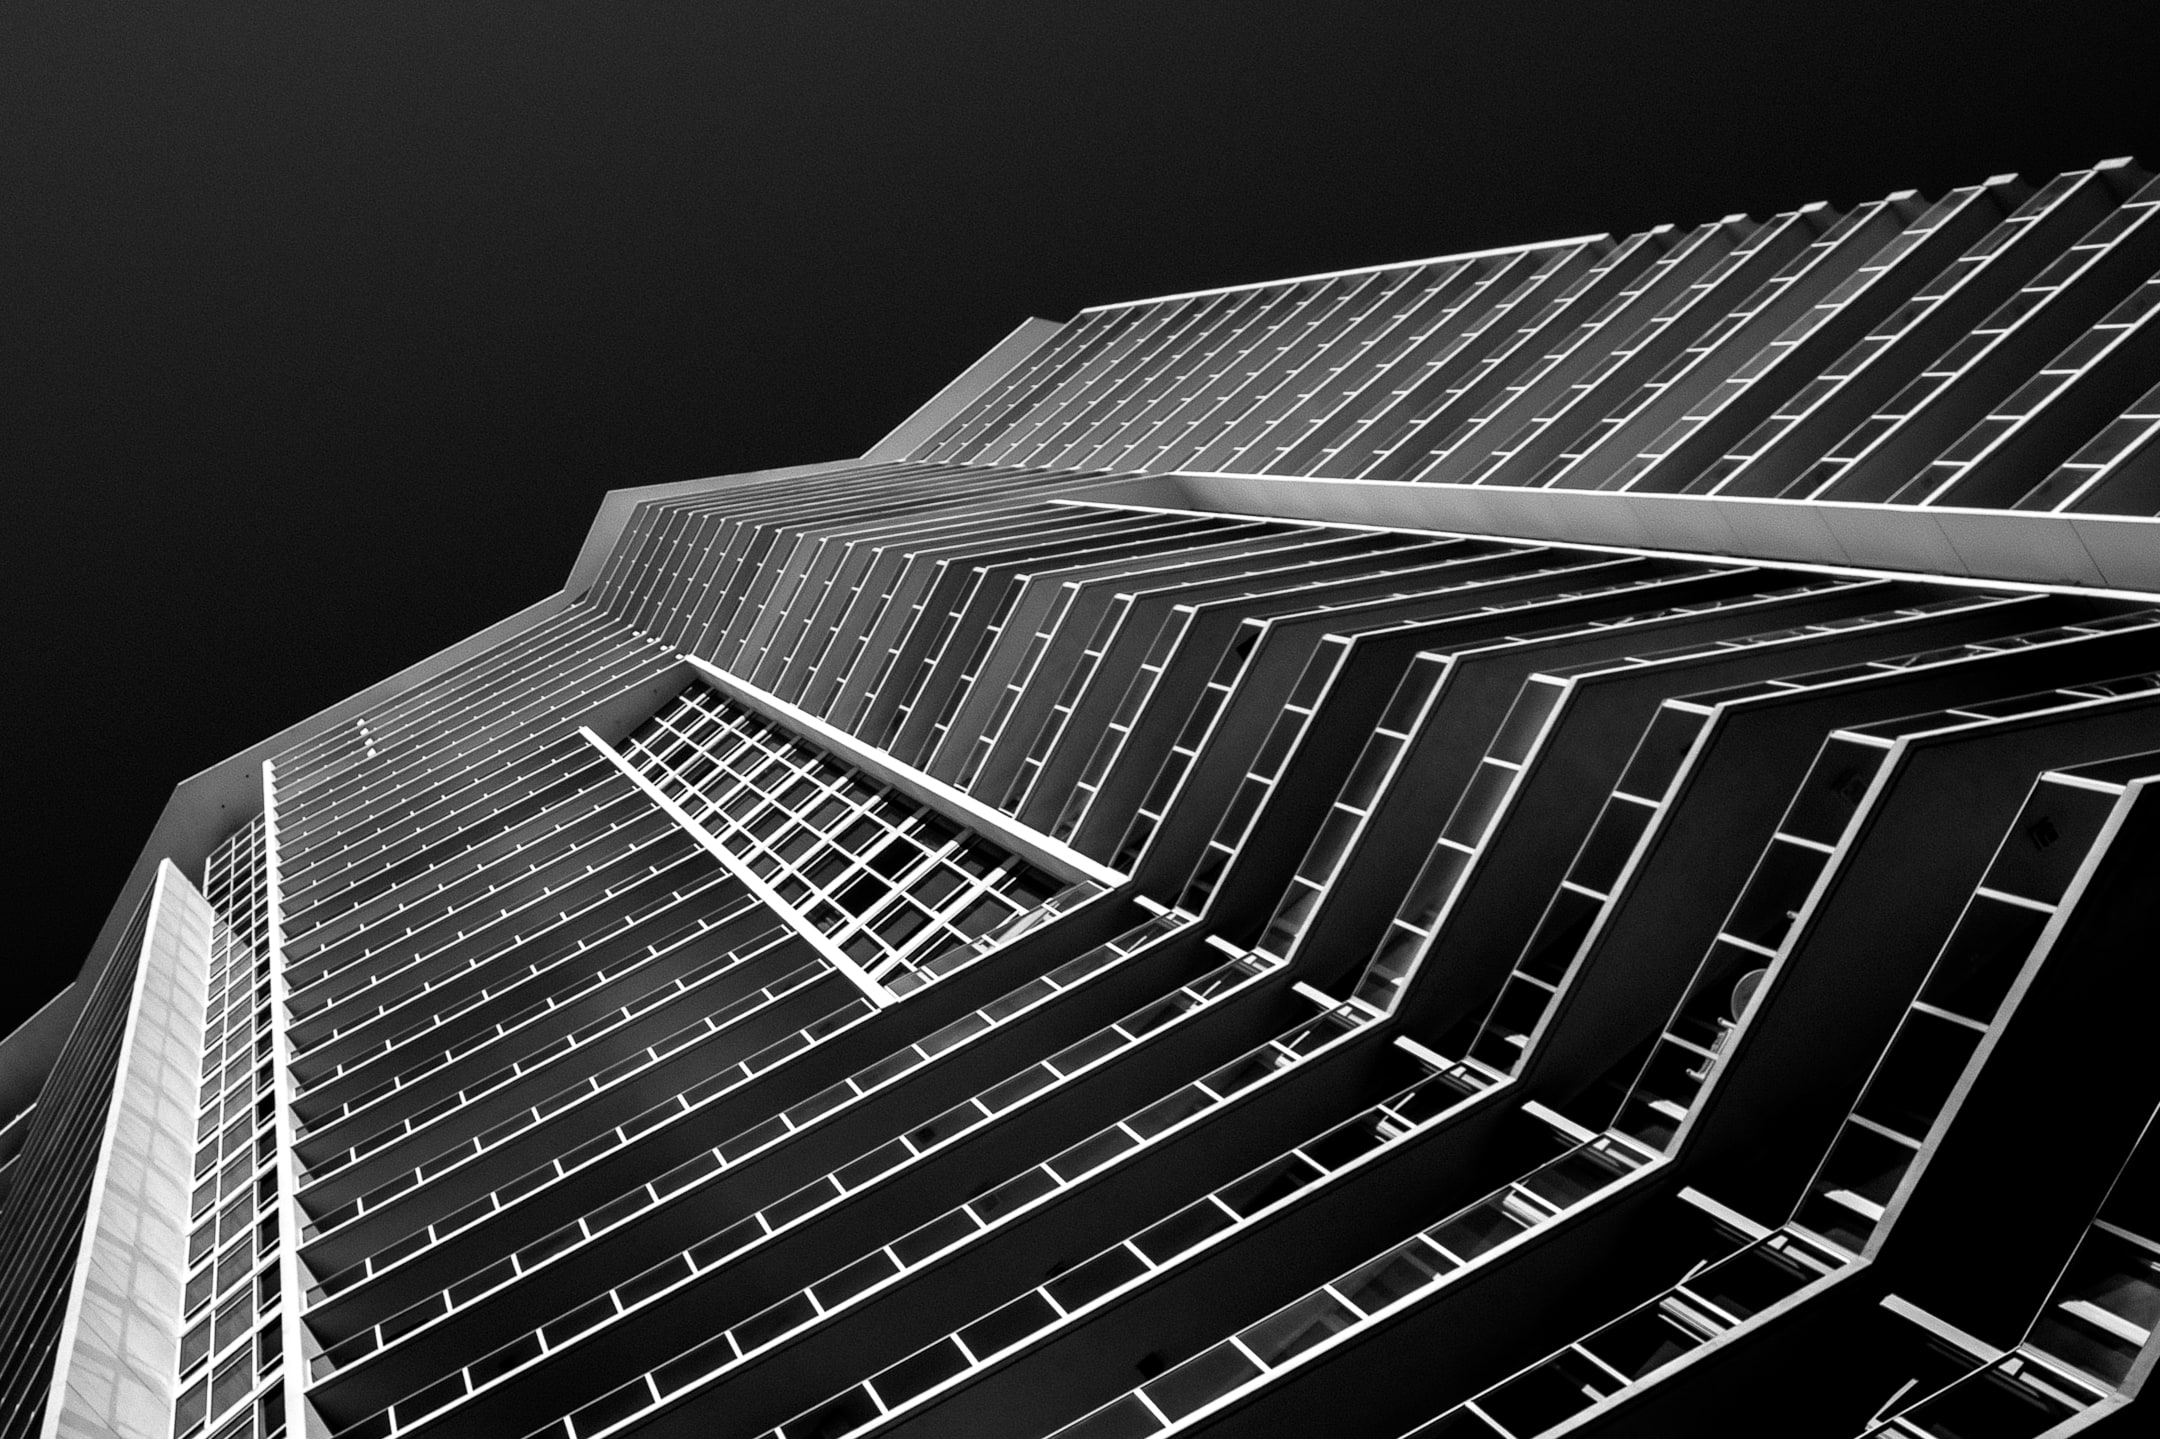 A tilted image of a building with strong vertical lines and symmetry. Monochrome.